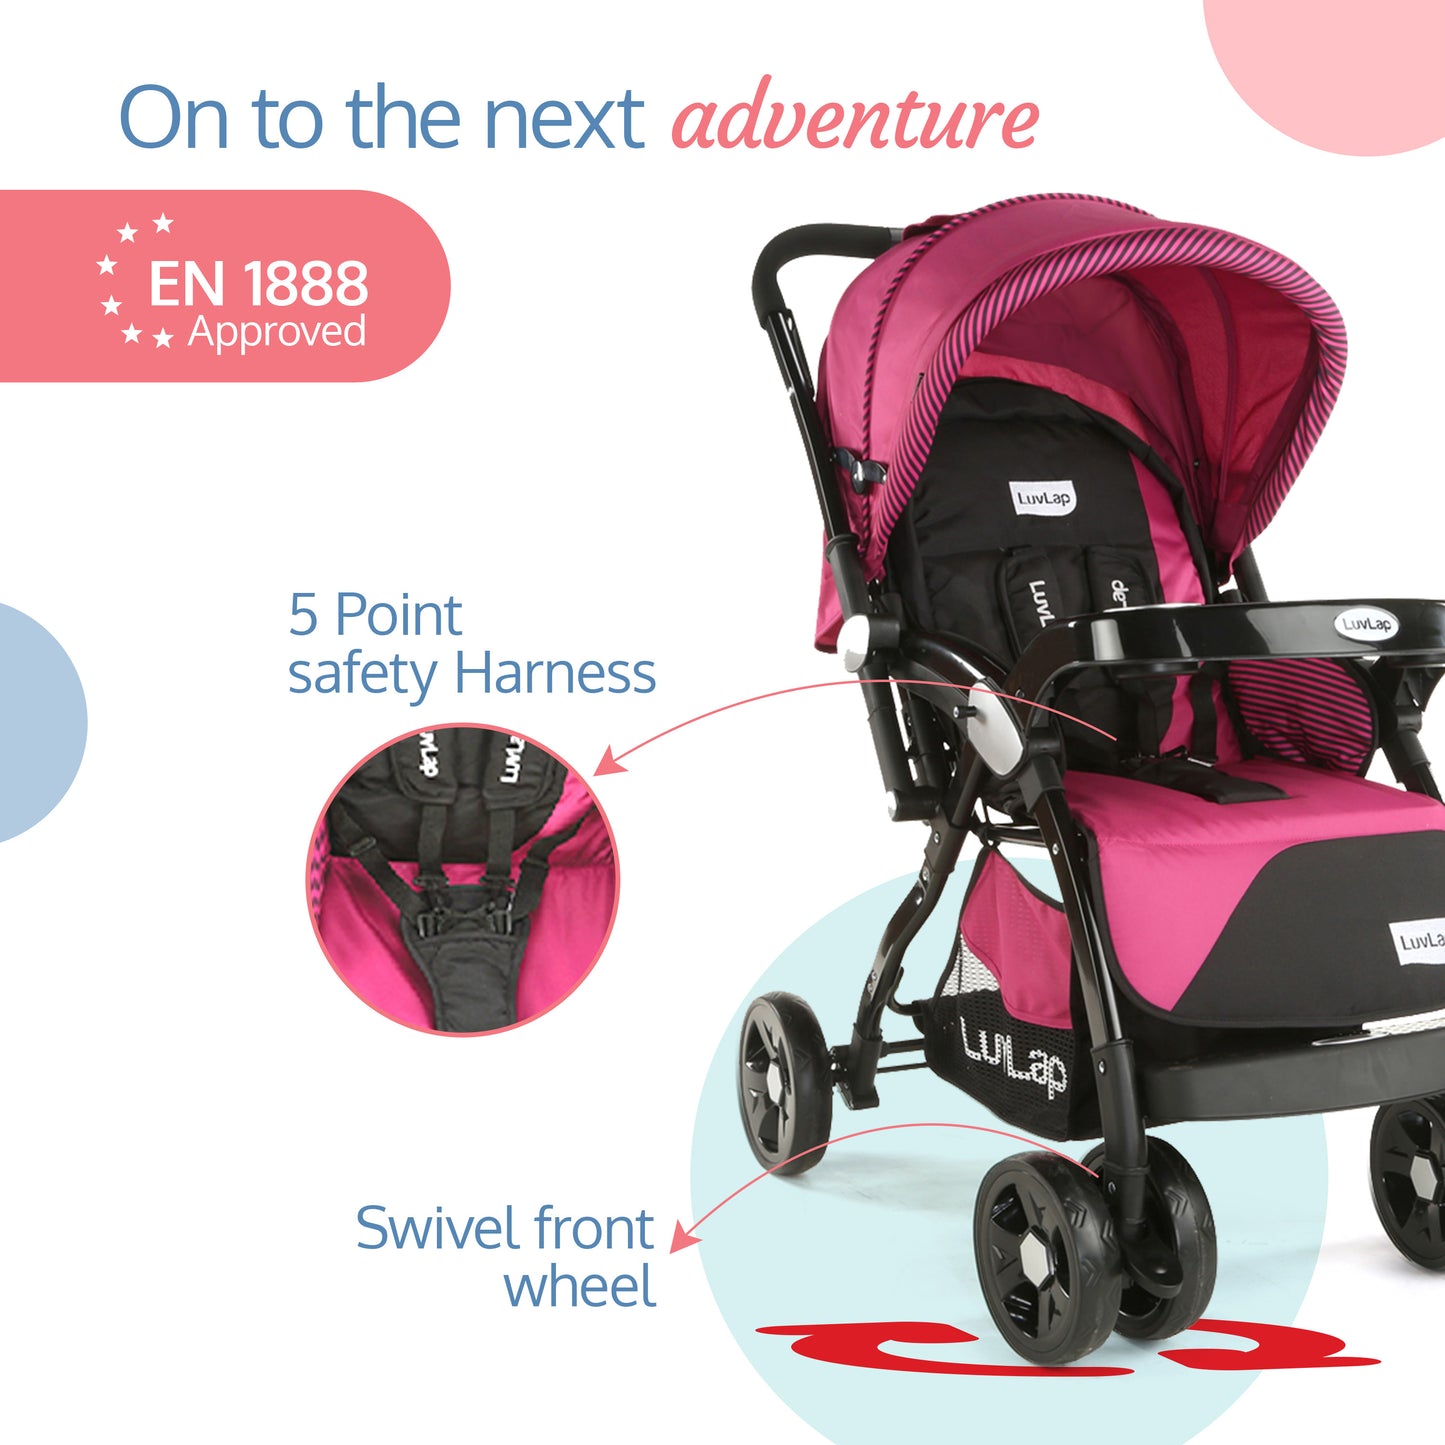 Galaxy baby stroller, Pram for baby with 5 point safety harness, Spacious Cushioned seat with Multi level seat recline, Easy Fold, Lightweight baby stroller for 0 to 3 years (Pink & Black)